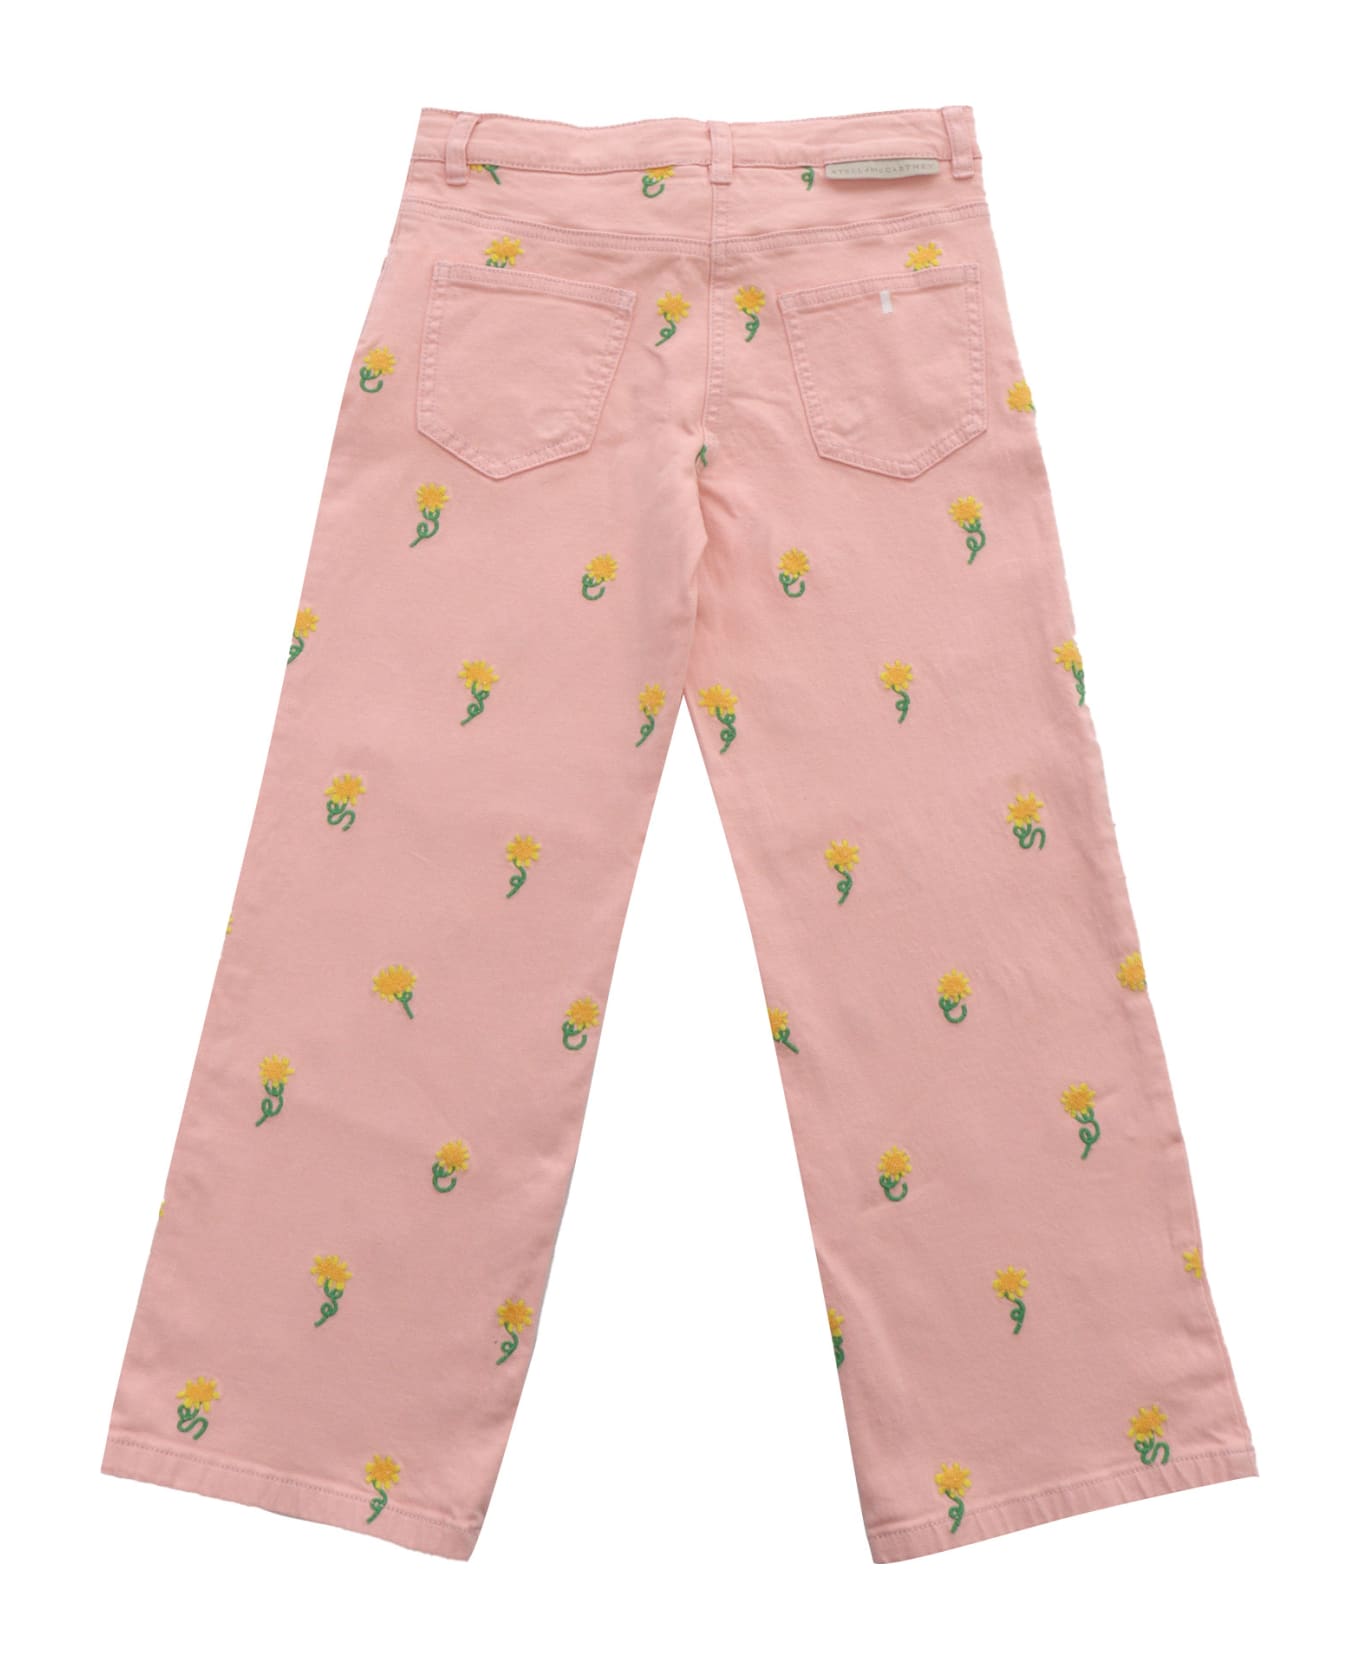 Stella McCartney Kids Pink Jeans With Flowers - PINK ボトムス